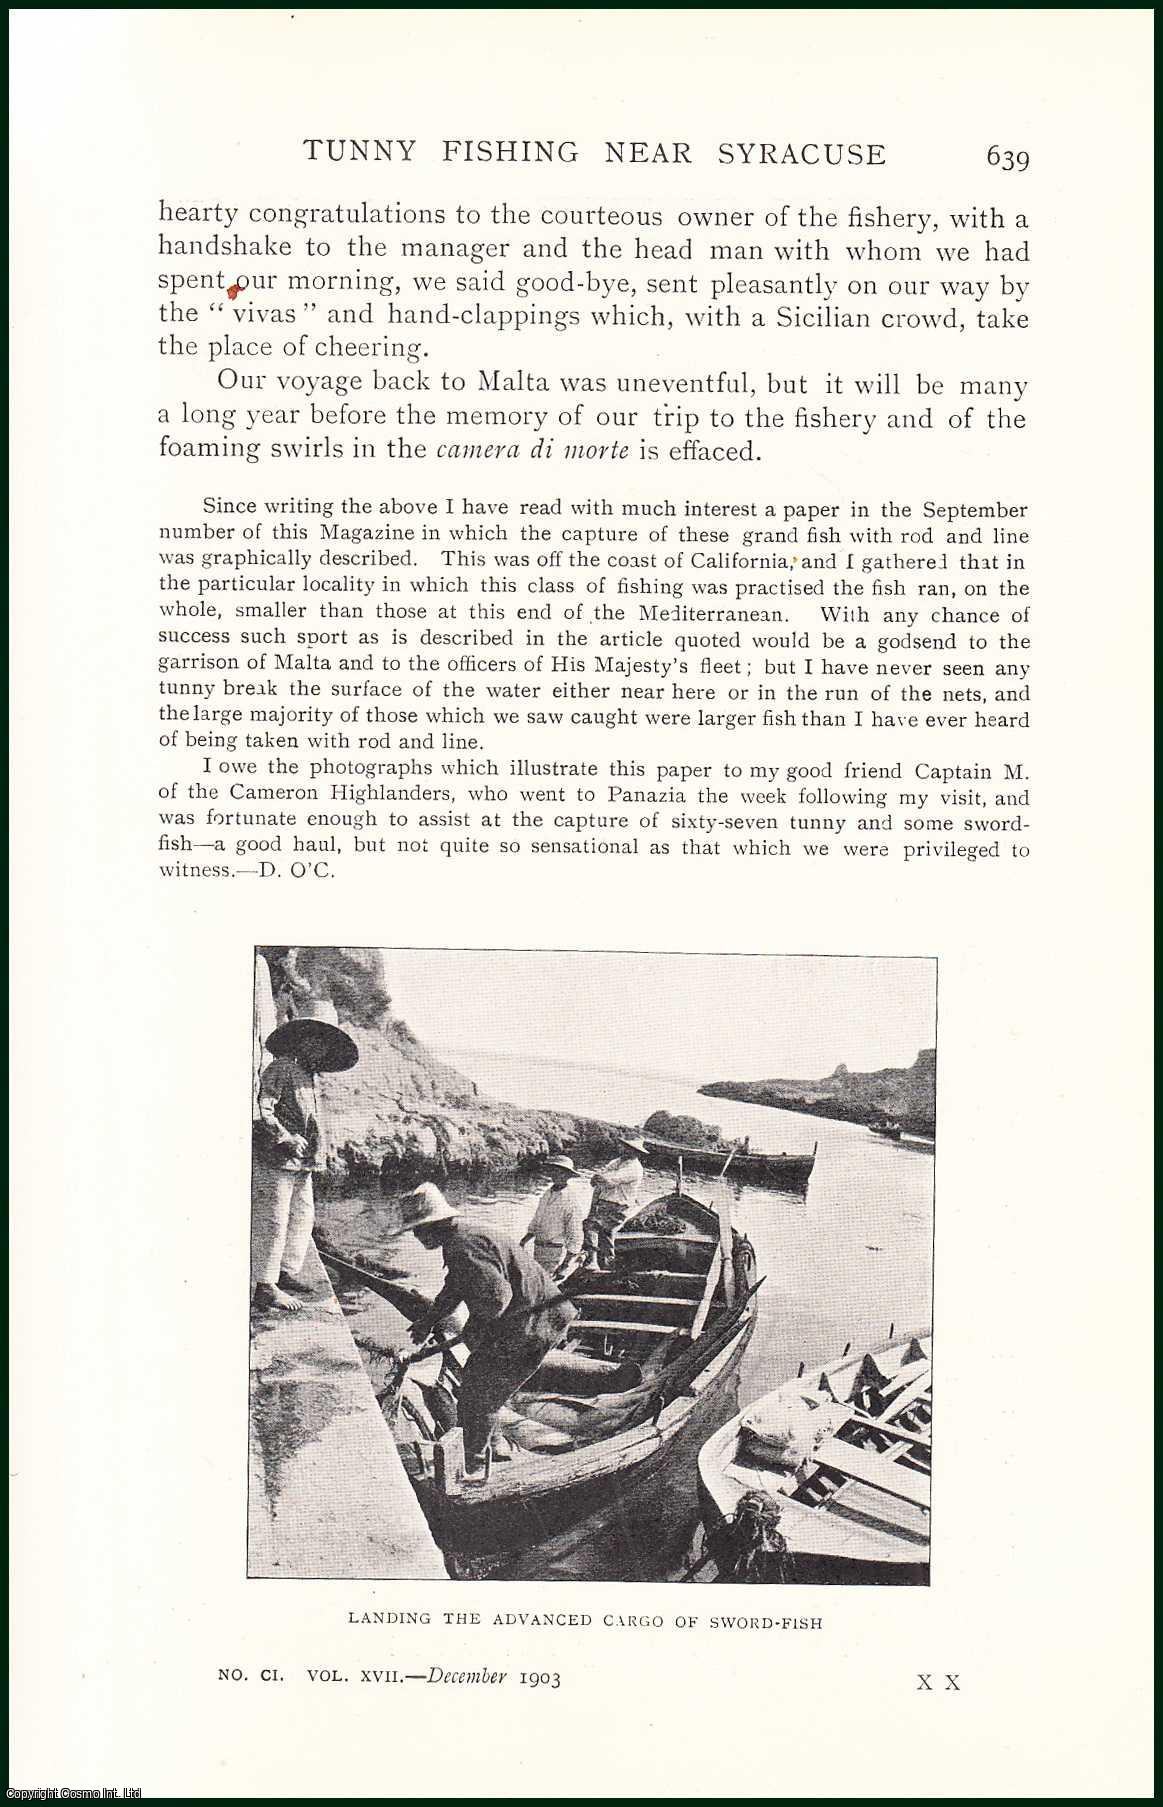 Major-General D. O'Callaghan - Tunny Mackerel Fishing Near Syracuse. An uncommon original article from the Badminton Magazine, 1903.